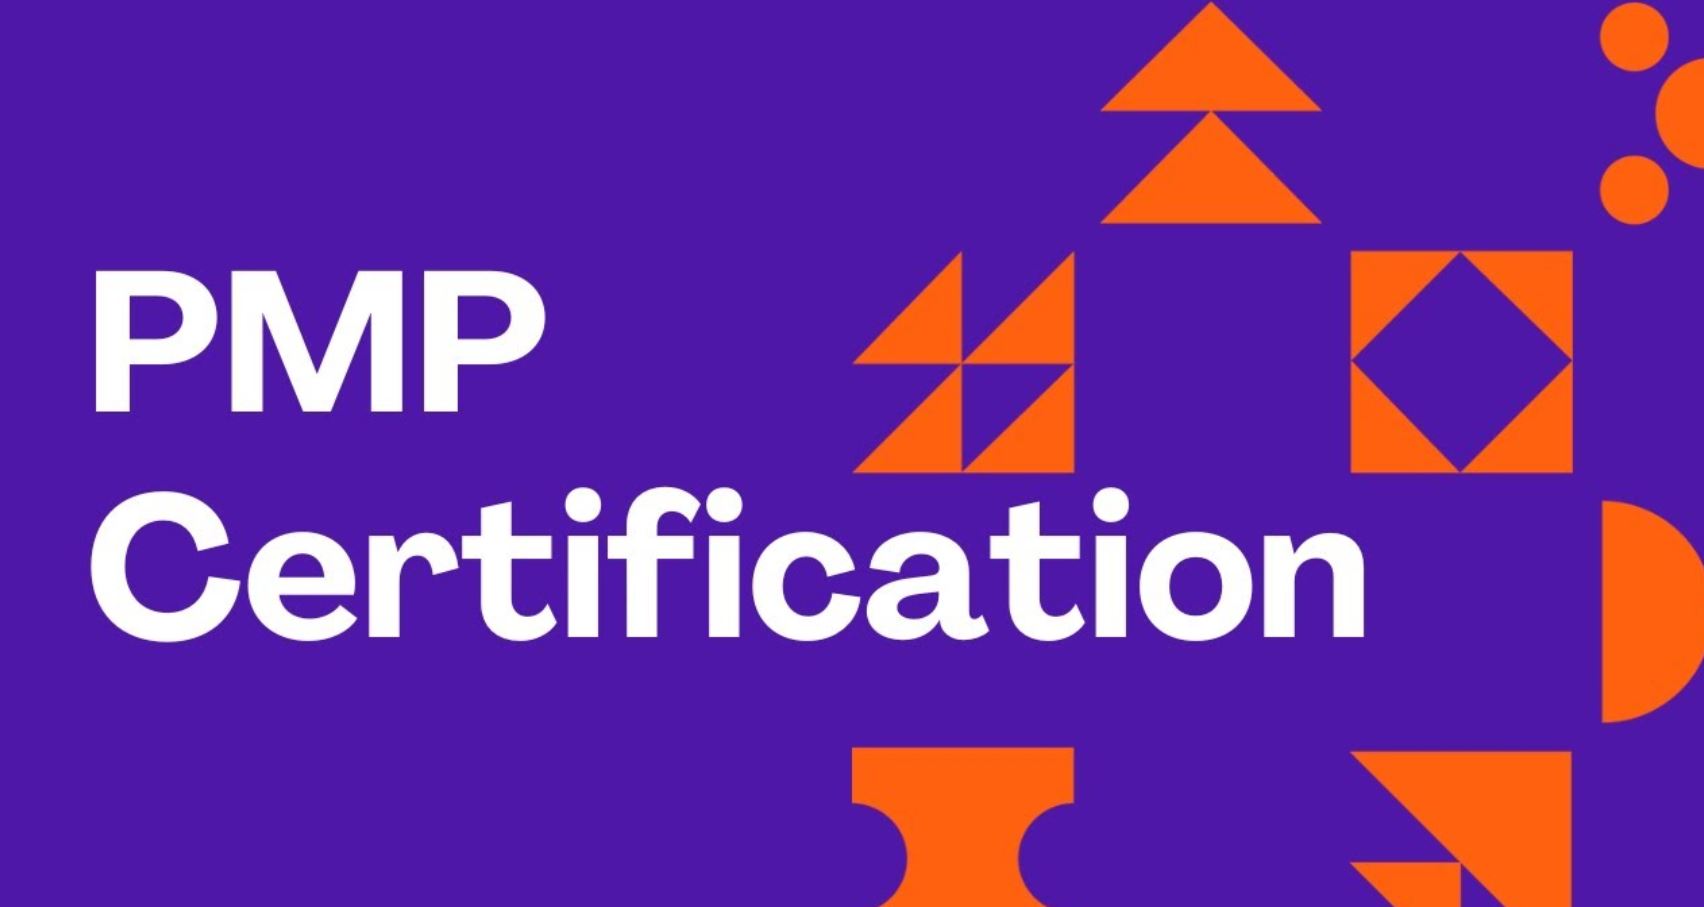 PMP Certifications